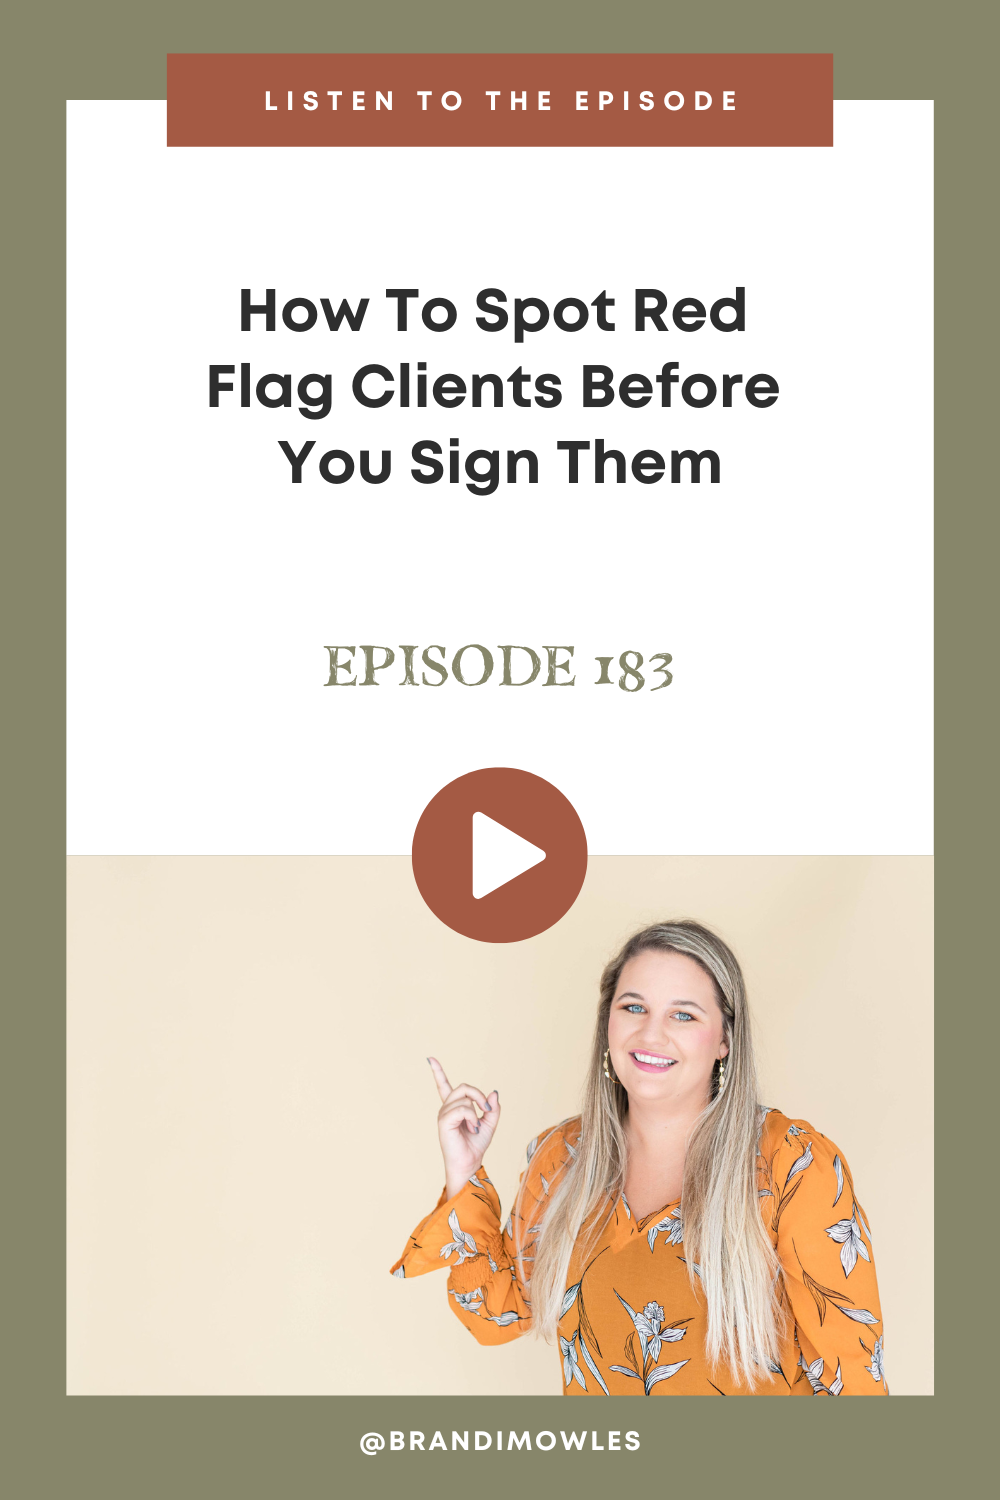 Brandi Mowles podcast episode feature about red flag clients